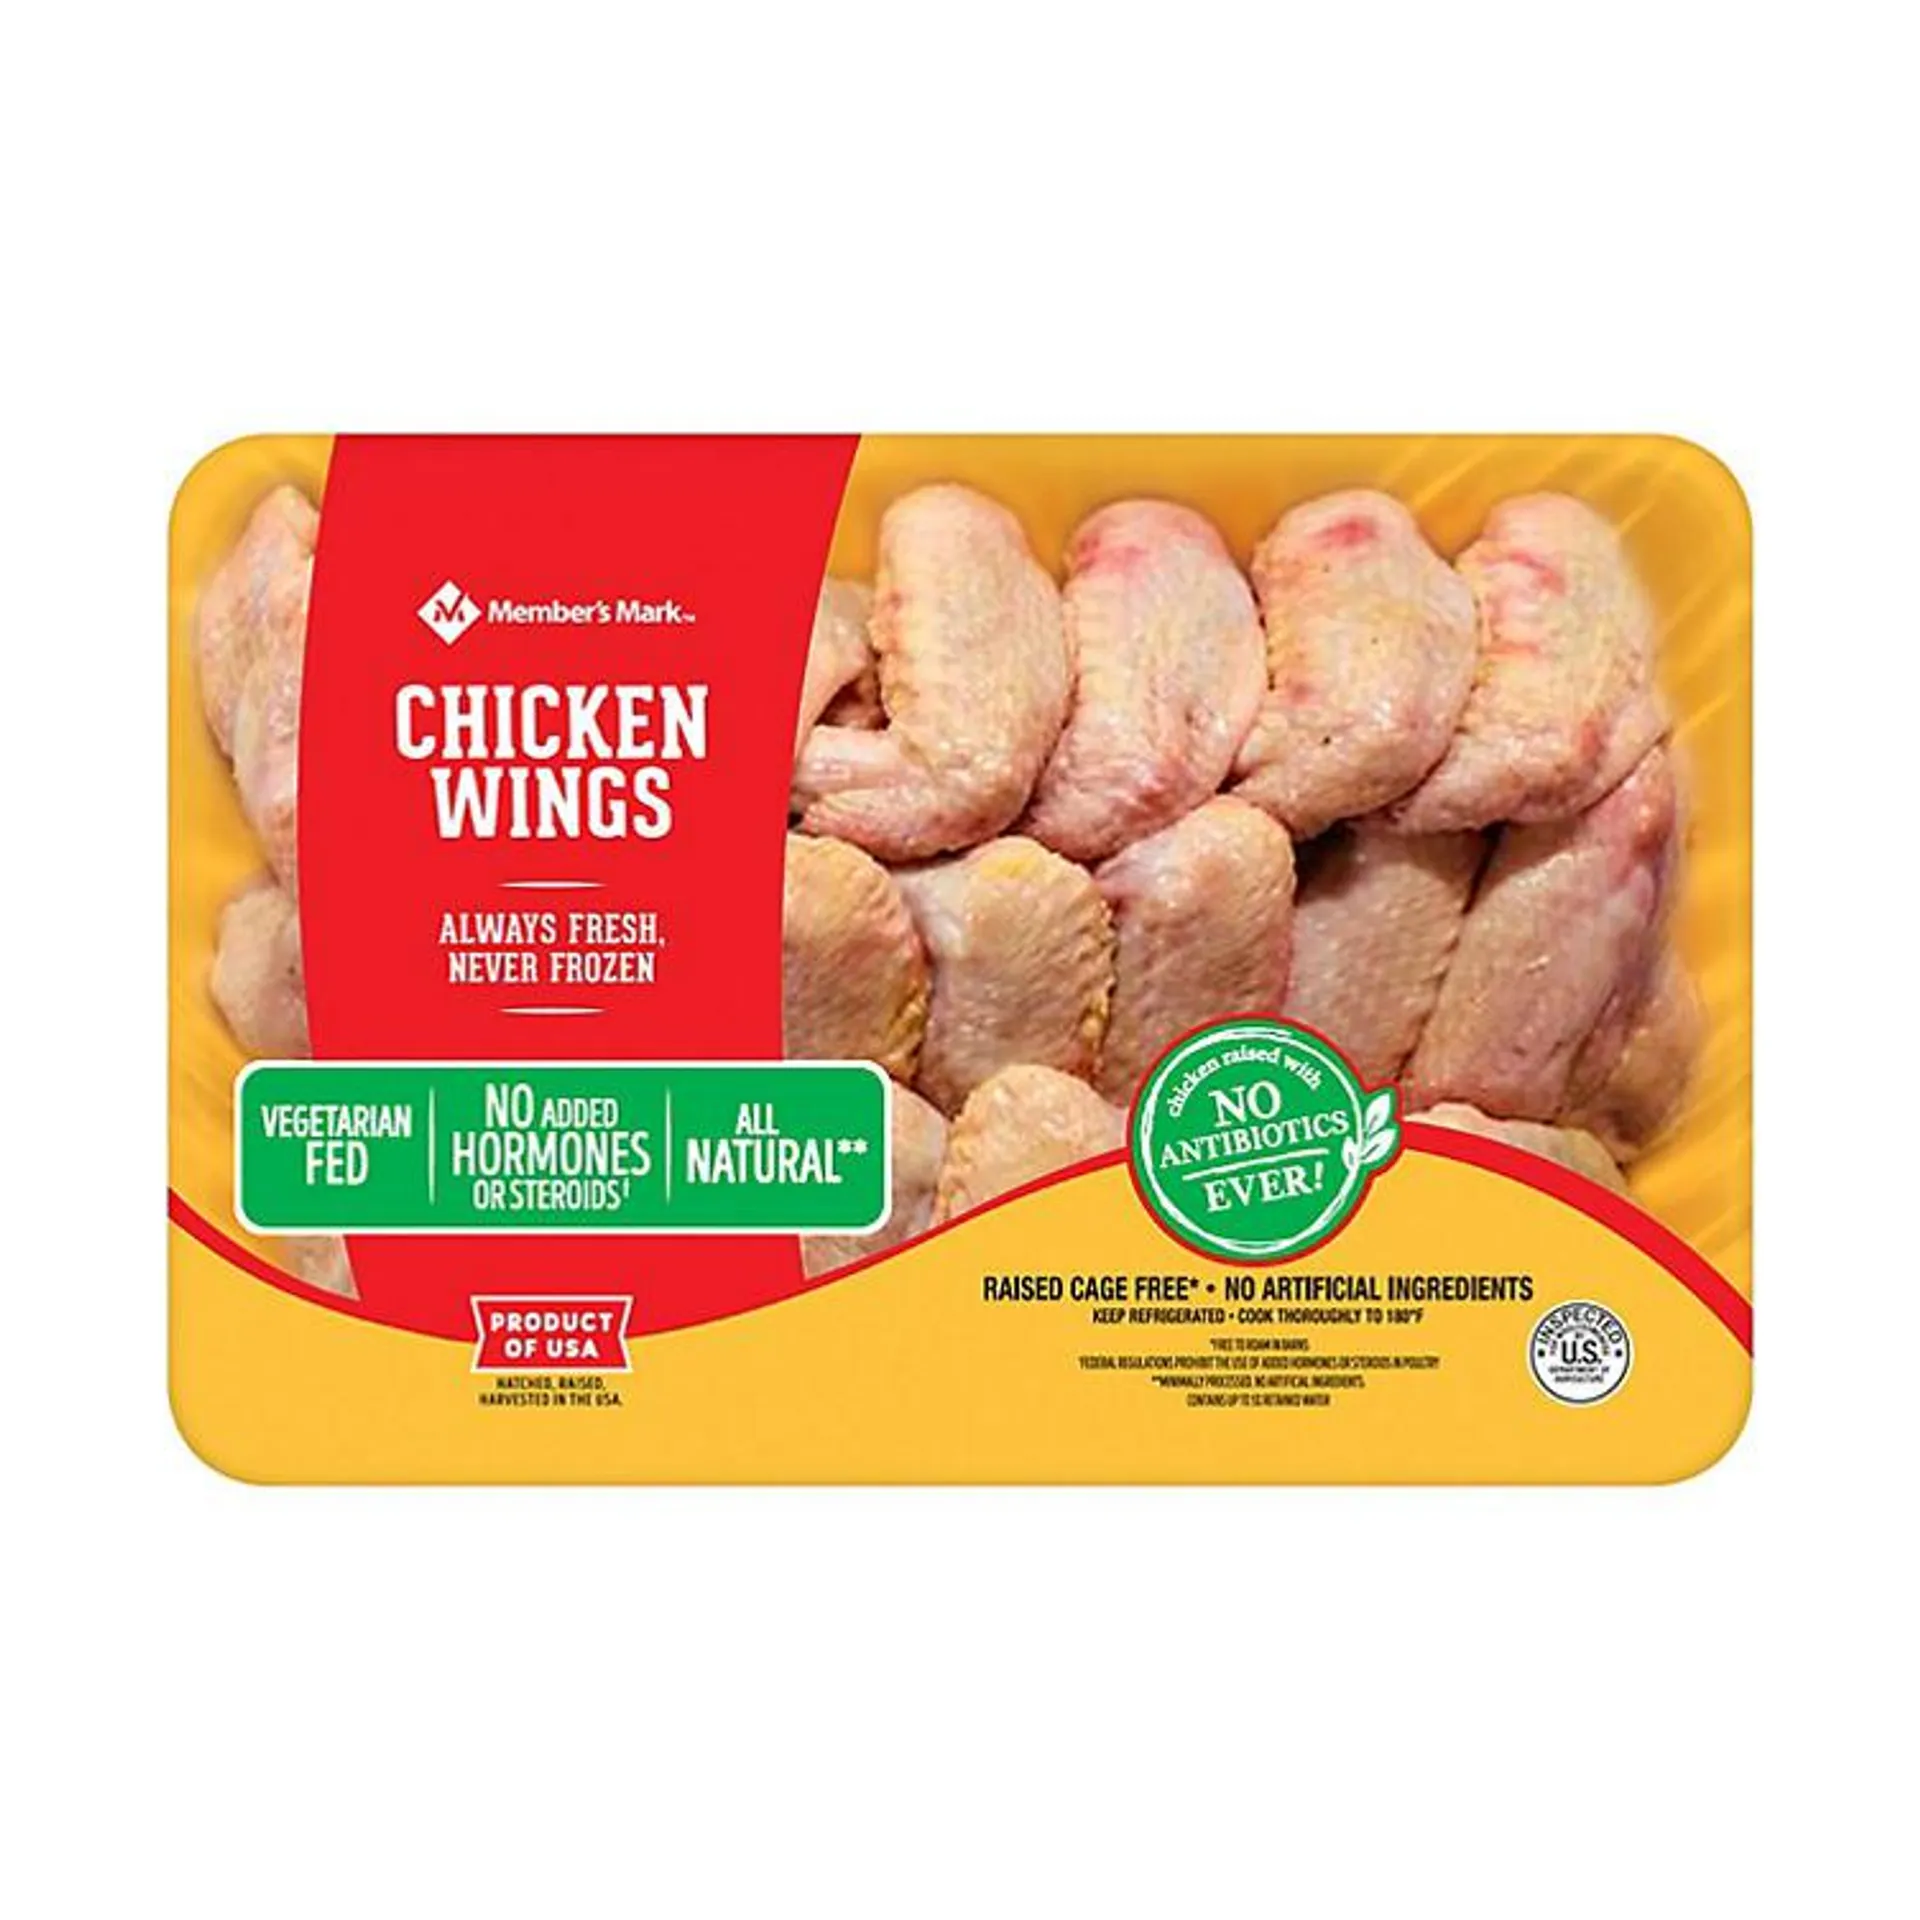 Member's Mark Whole Chicken Wings (priced per pound)